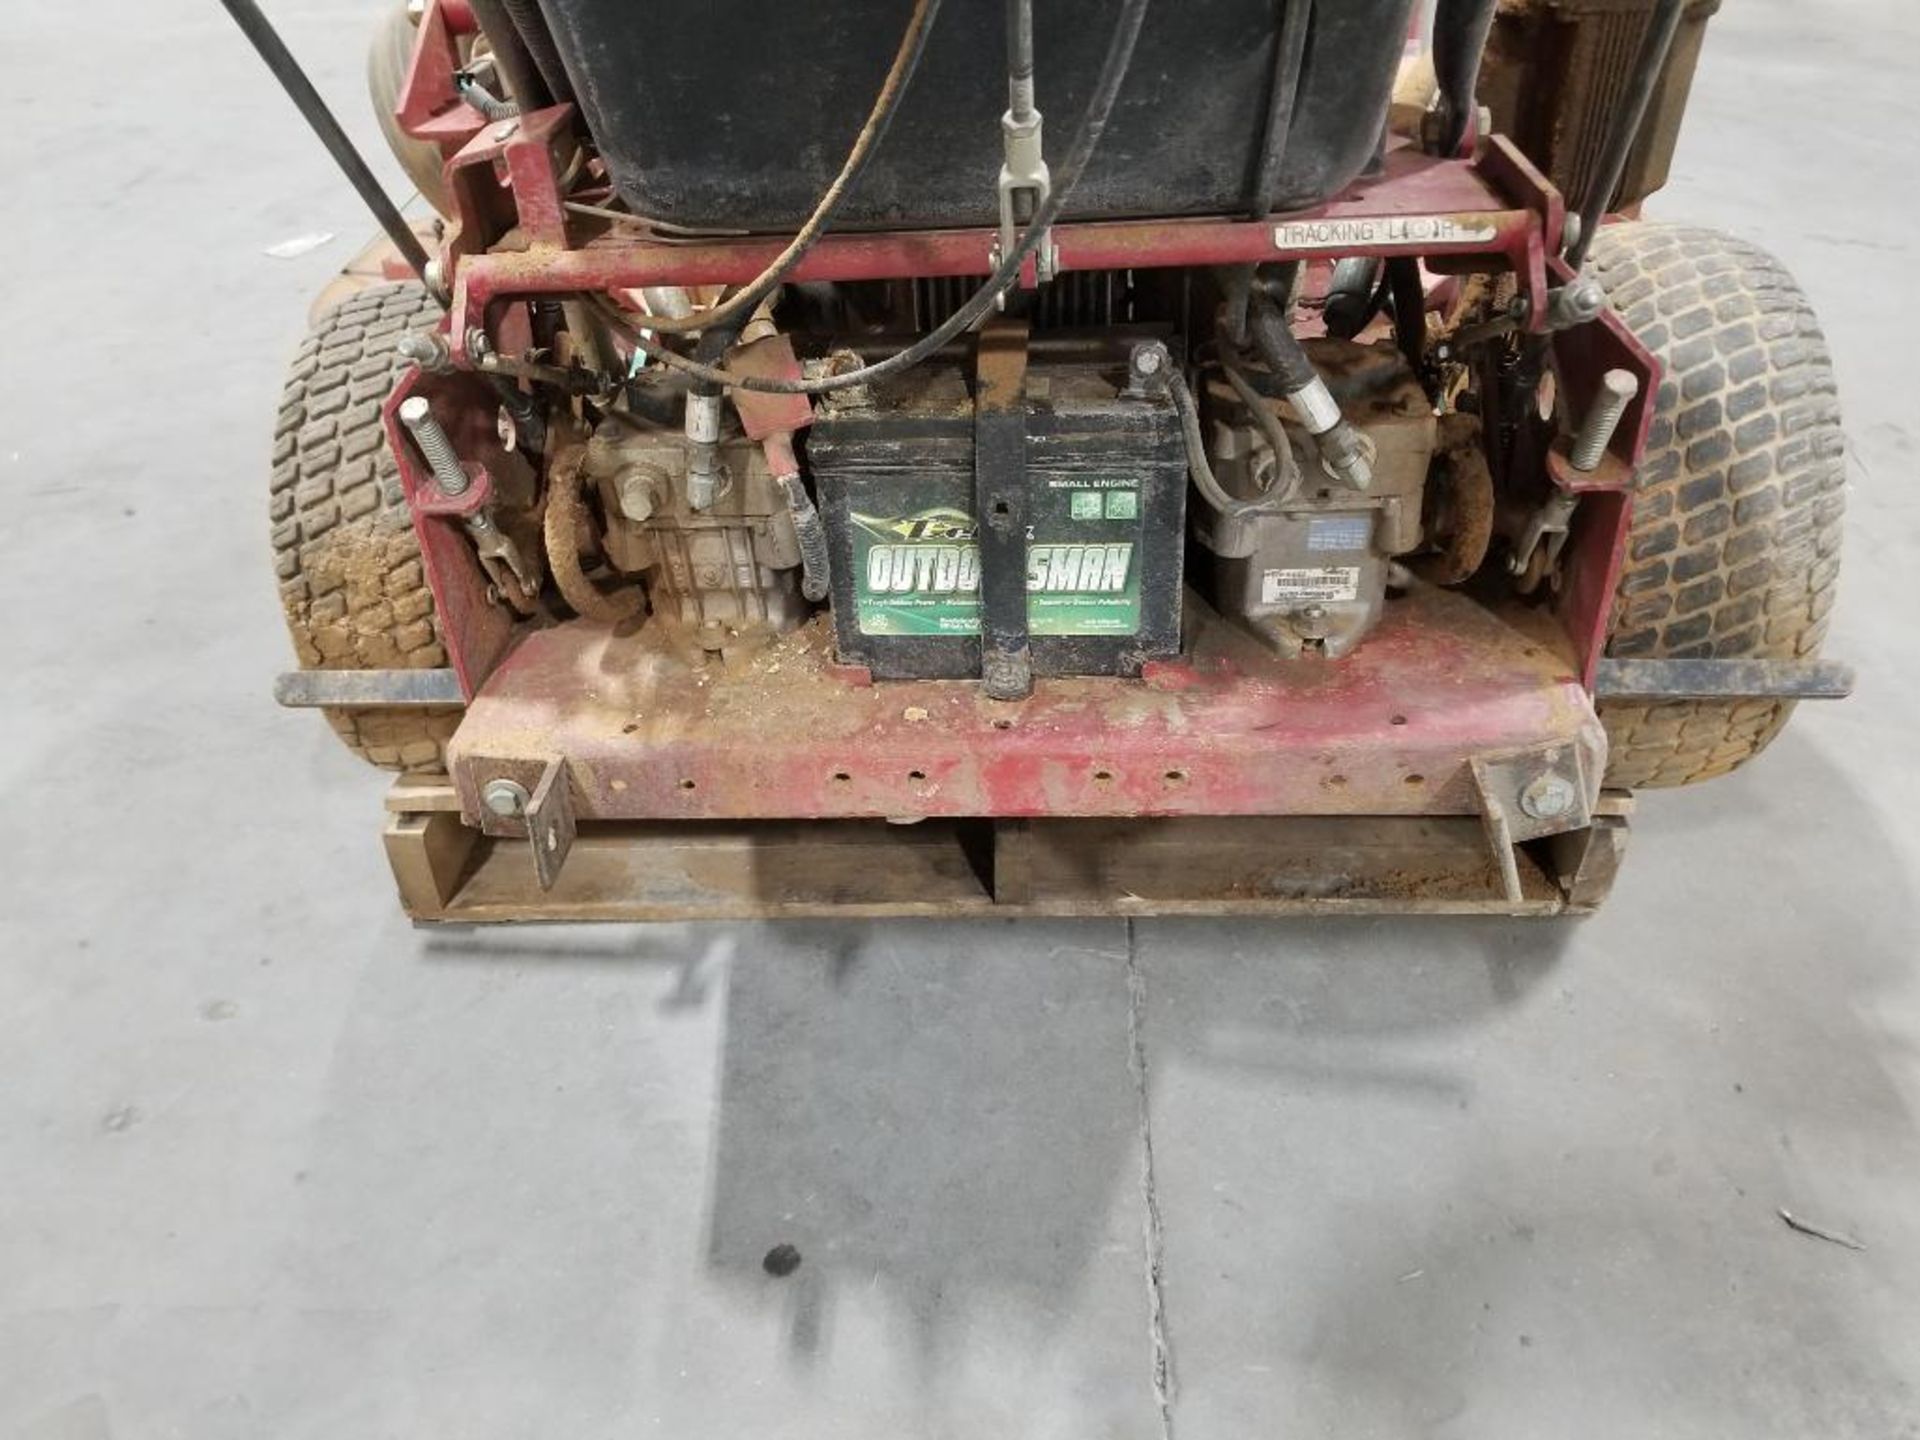 60in Exmark walk behind mower. Kawasaki 22hp engine. Working condition unknown. Battery is dead. - Image 8 of 20